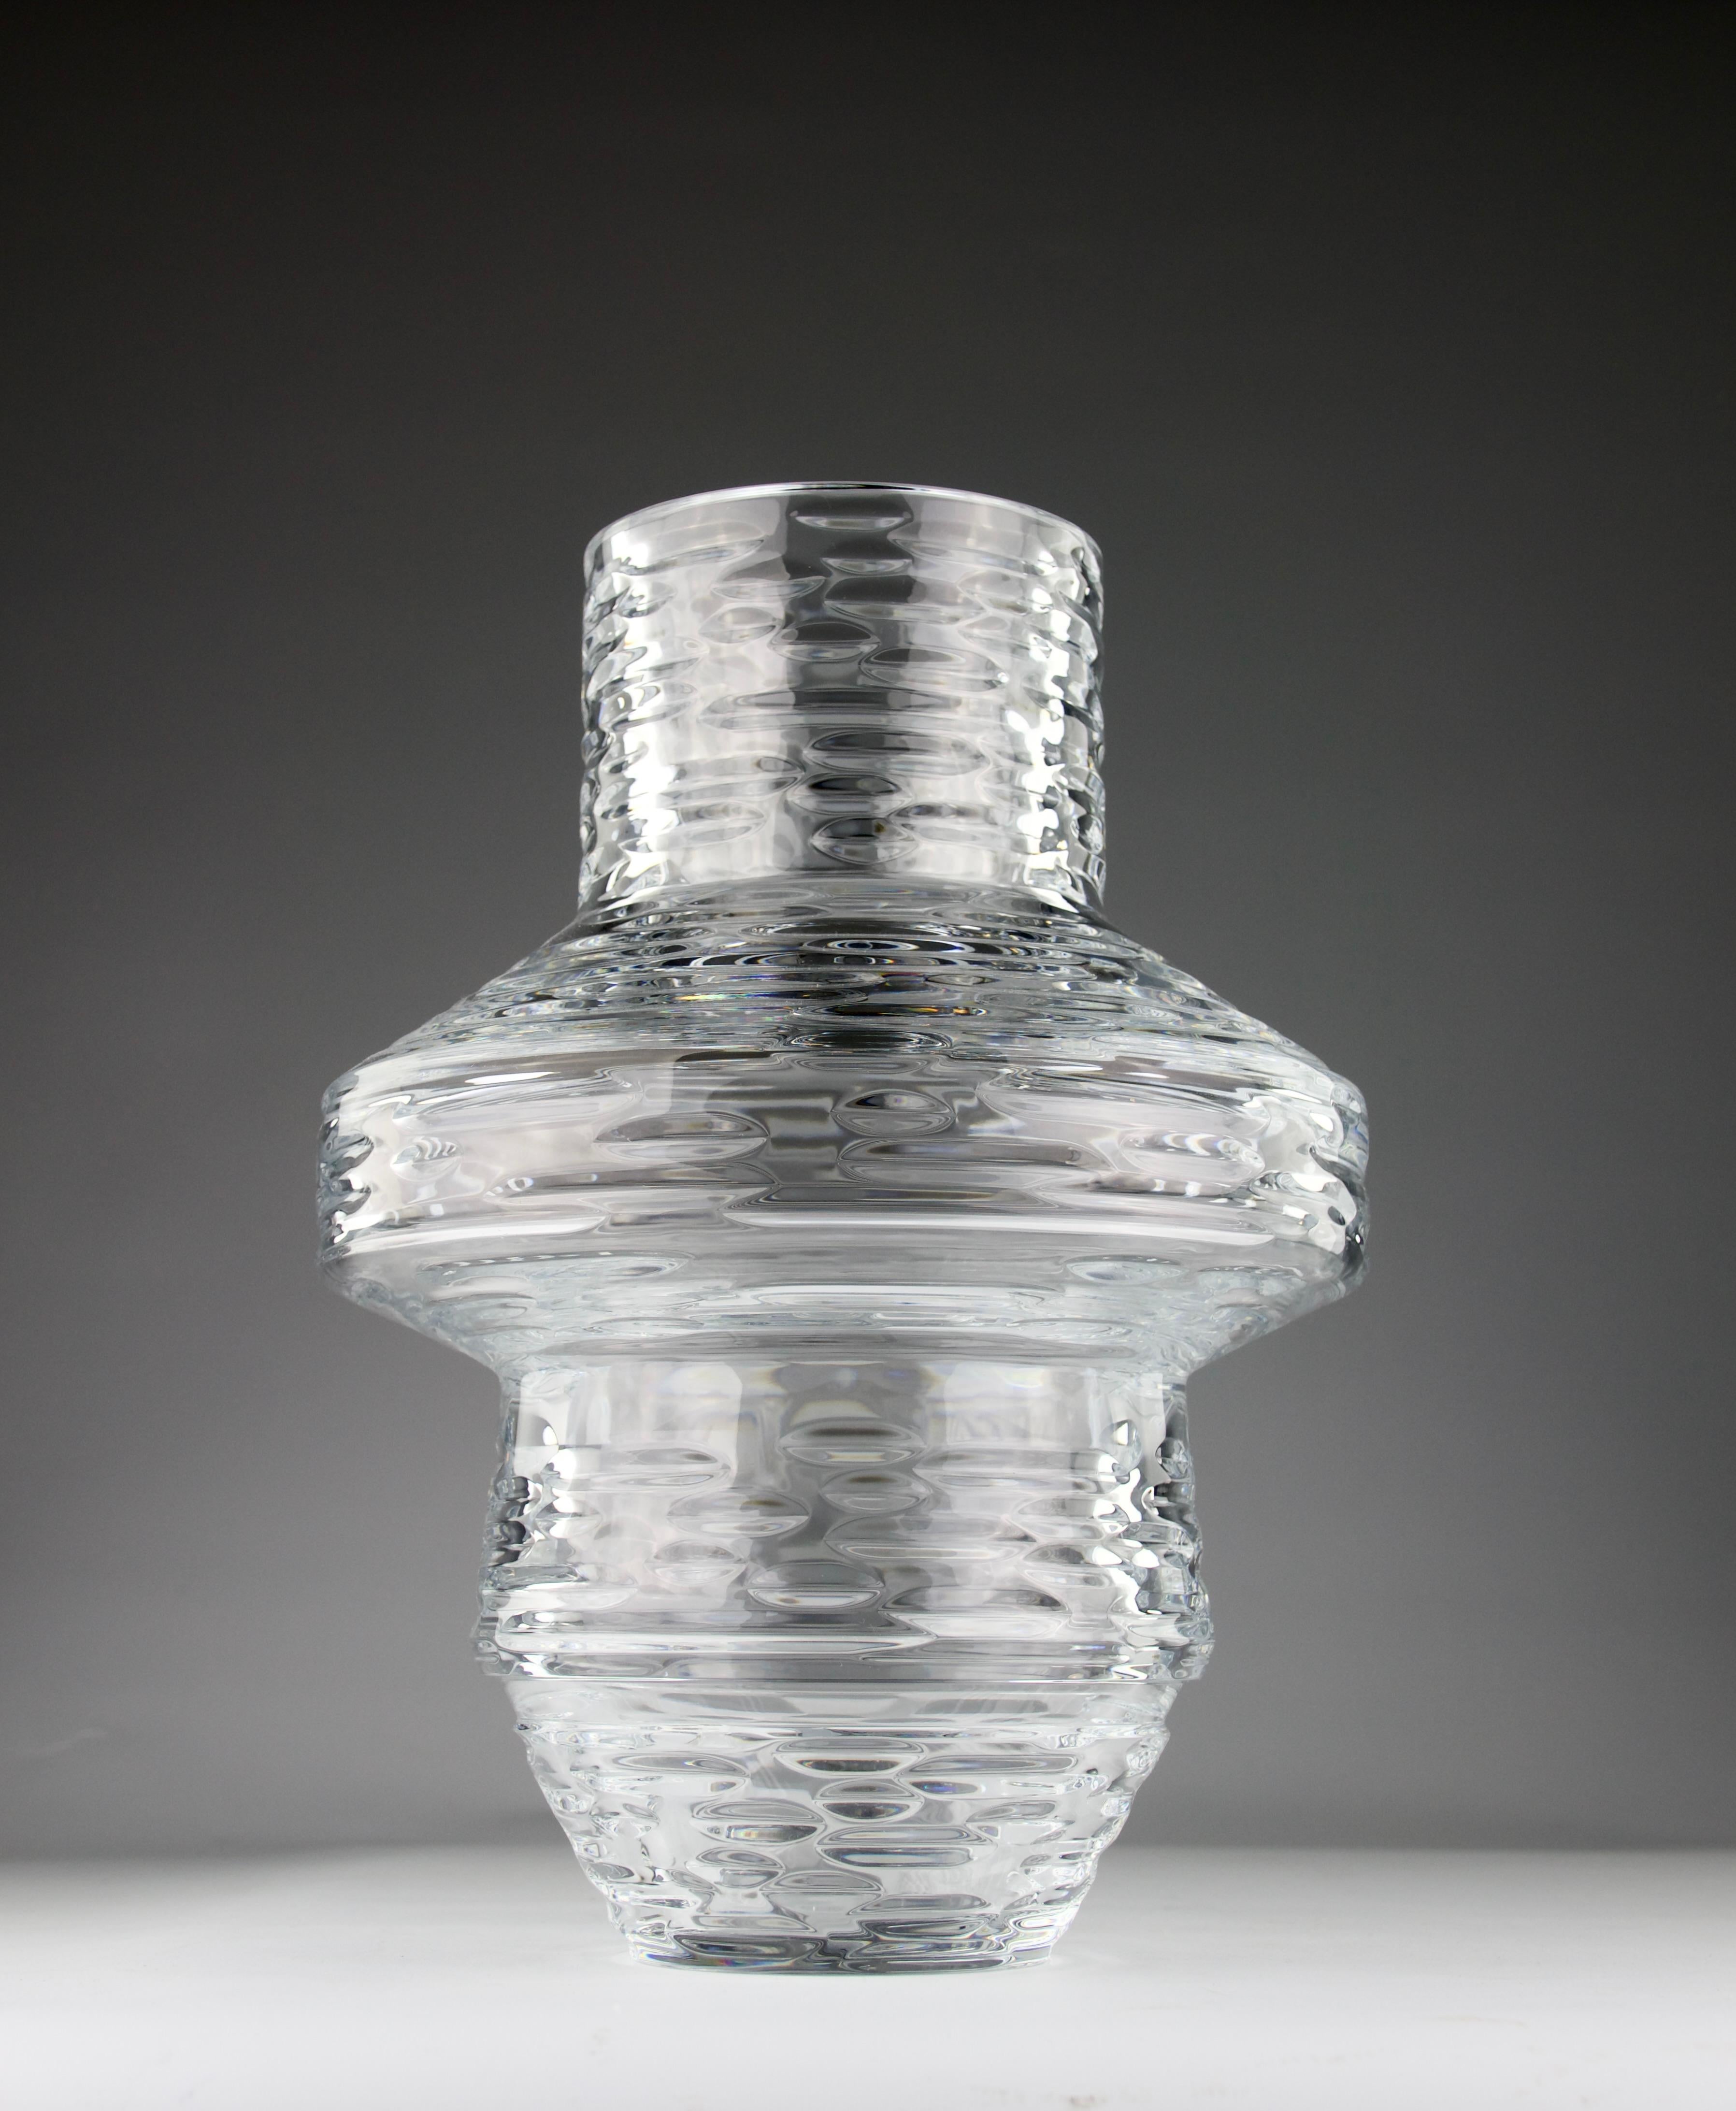 Superb crystal vase designed by Patricia Urquiola for the Baccarat manufacture. Signed by the designer and manufacture. Numbered 70.

Dimensions in cm ( H x D ) : 32 x 22

Secure shipping.

Since 1764 Baccarat has written the chapters of its